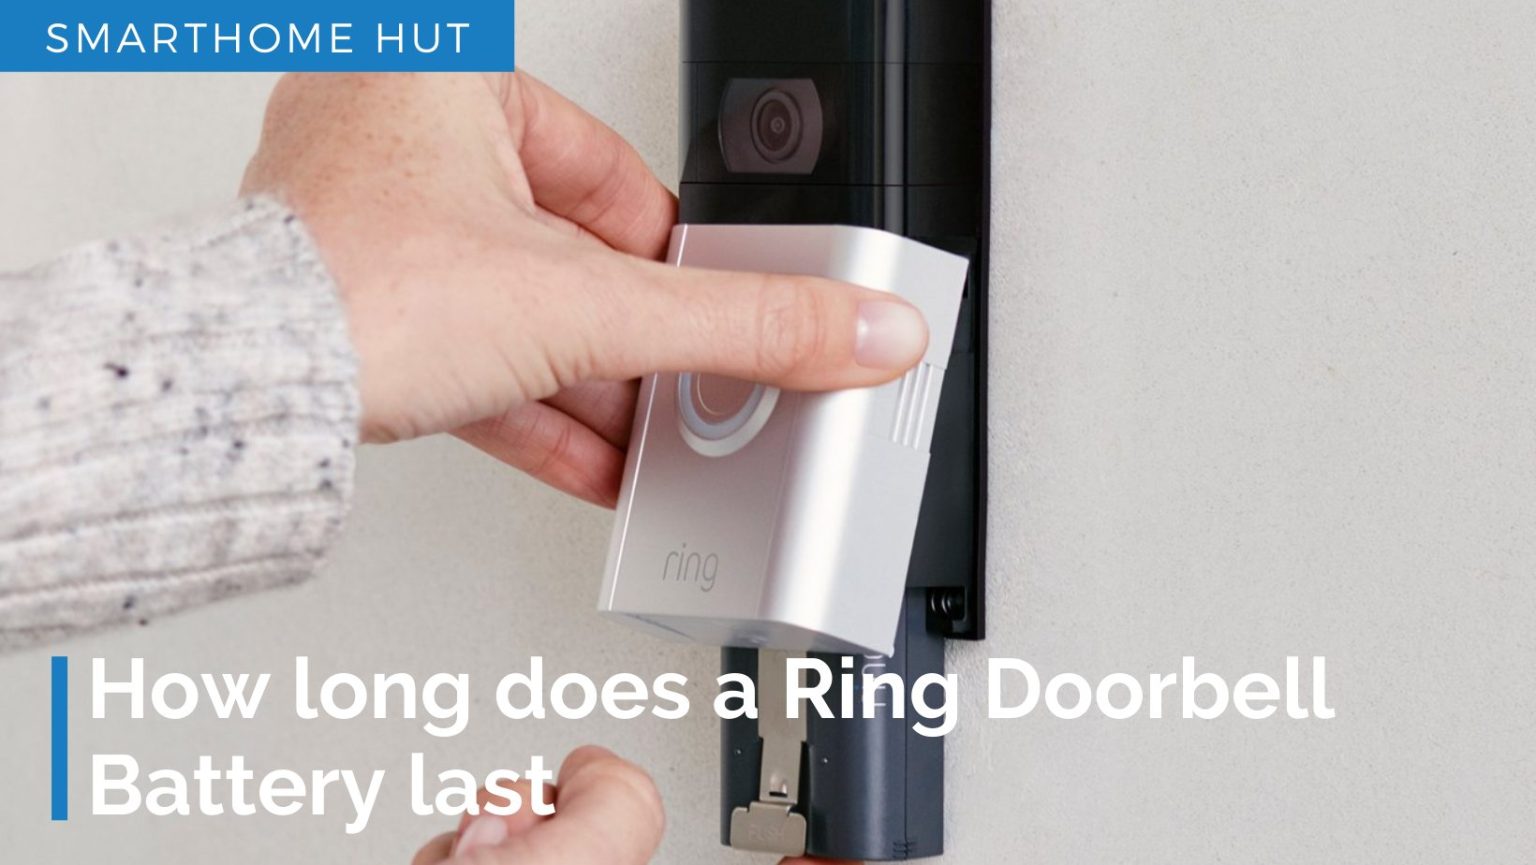 How long does a Ring Doorbell battery last? - Smarthome Hut